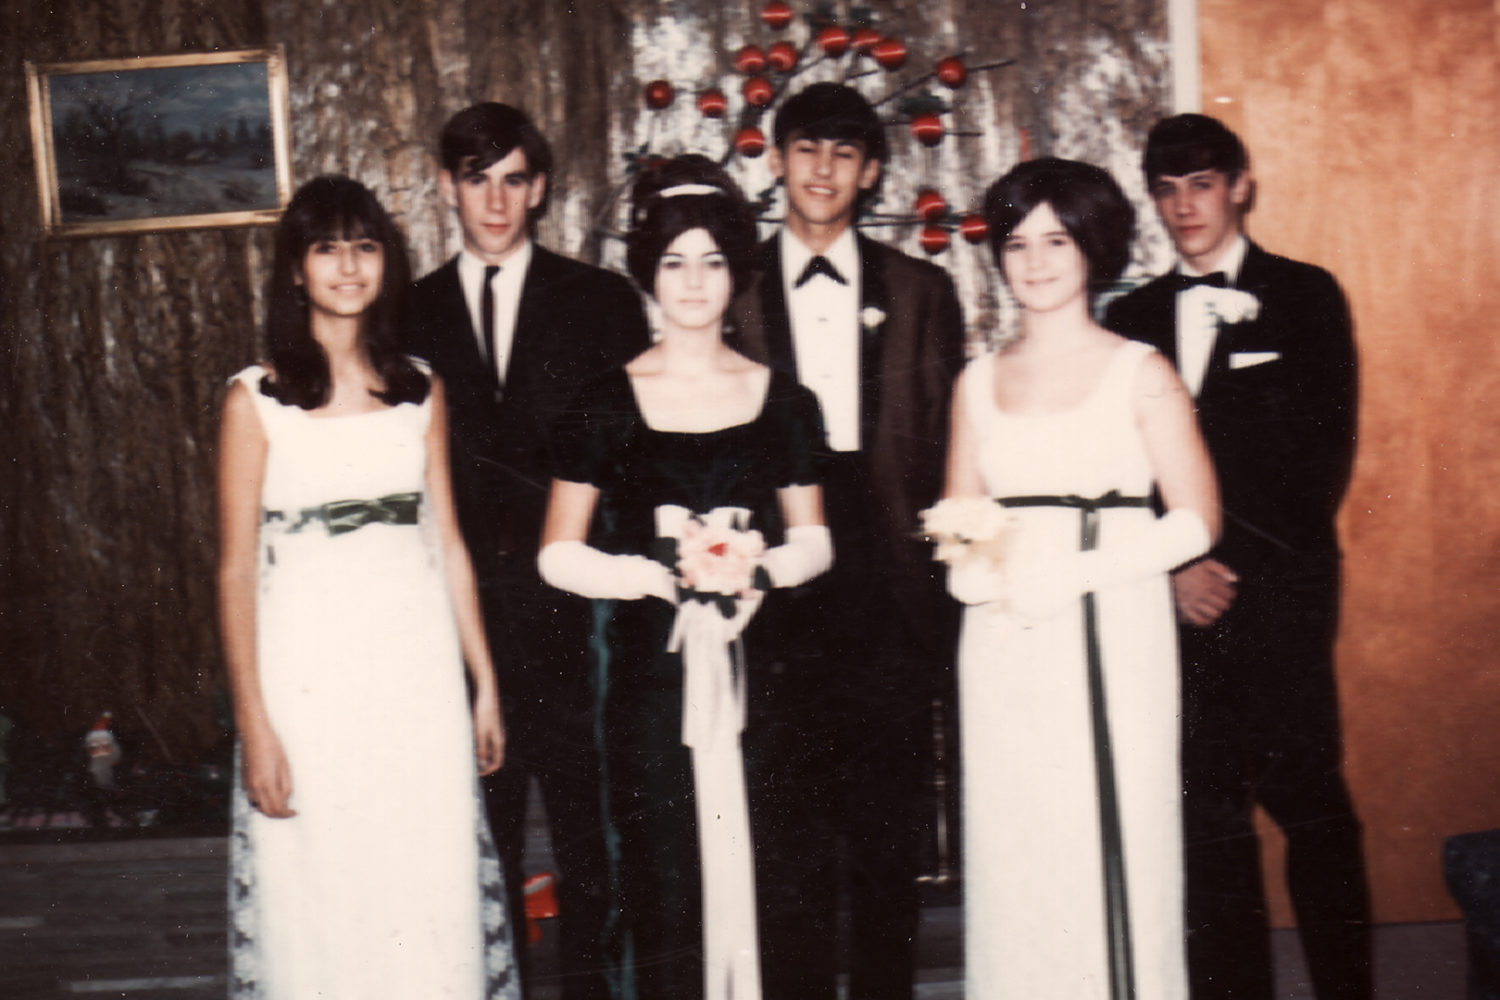 Me, on the left, before Junior Prom 1966